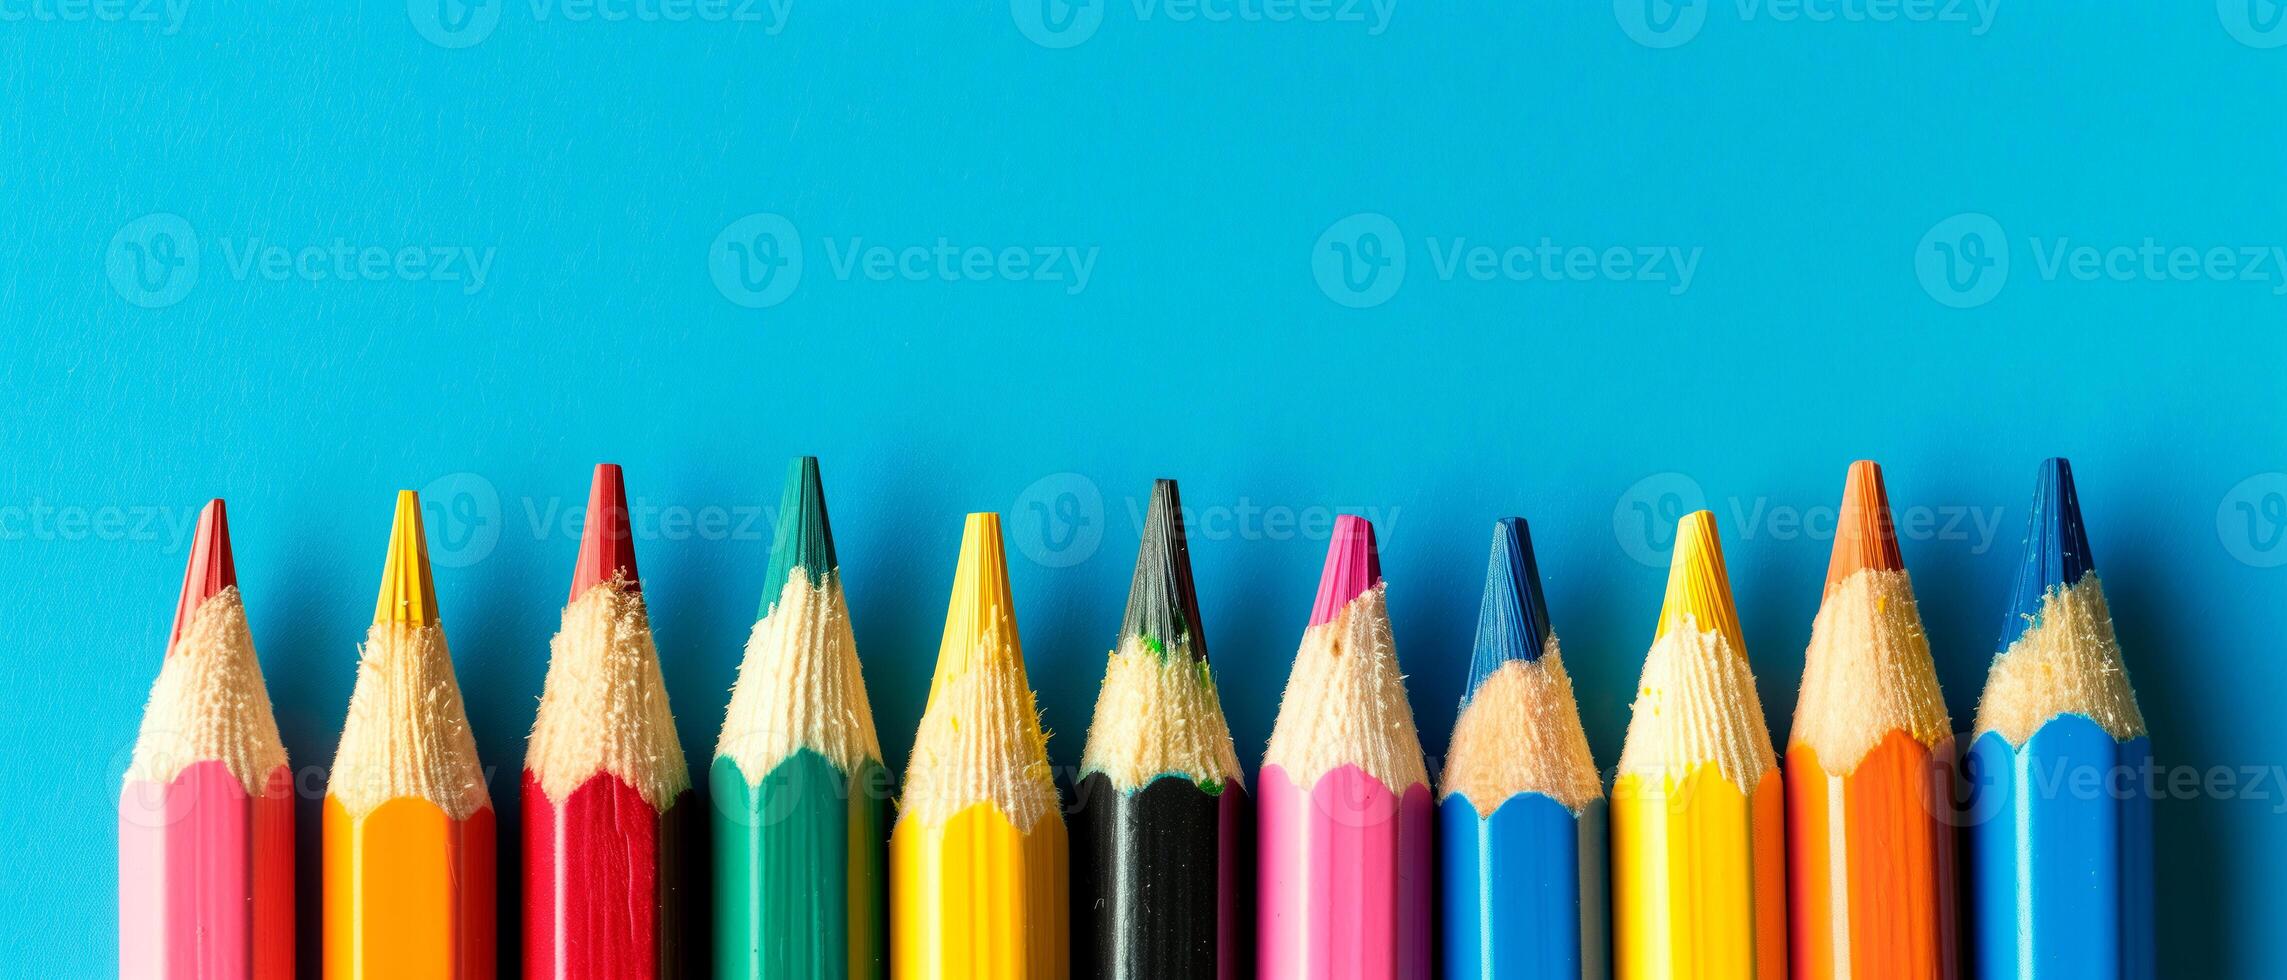 Colourful pencils isolated over blue background. Close up image of vibrant pencils for school with empty space for text. photo